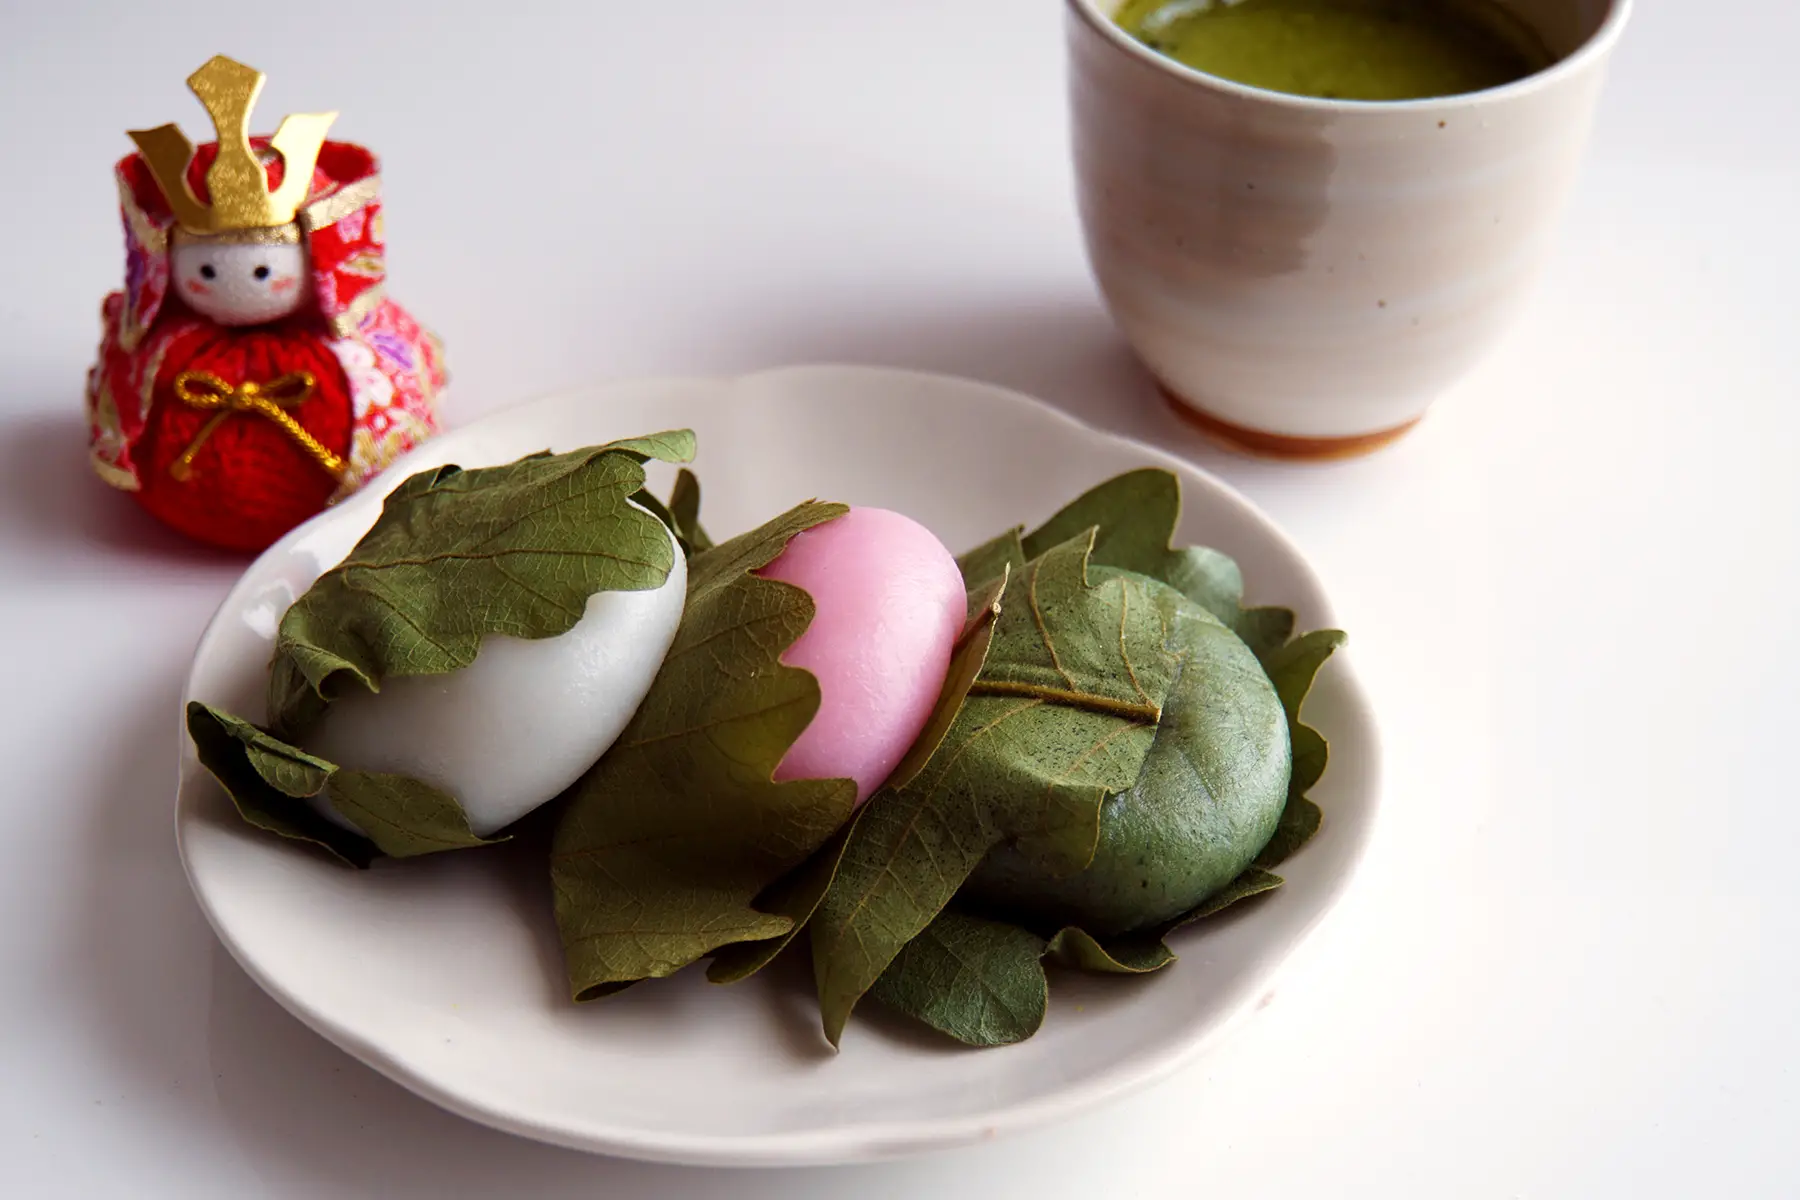 A plate of three rice cakes in white, pink, and green, wrapped in leaves. Accompanied by a statuette and cup of tea.